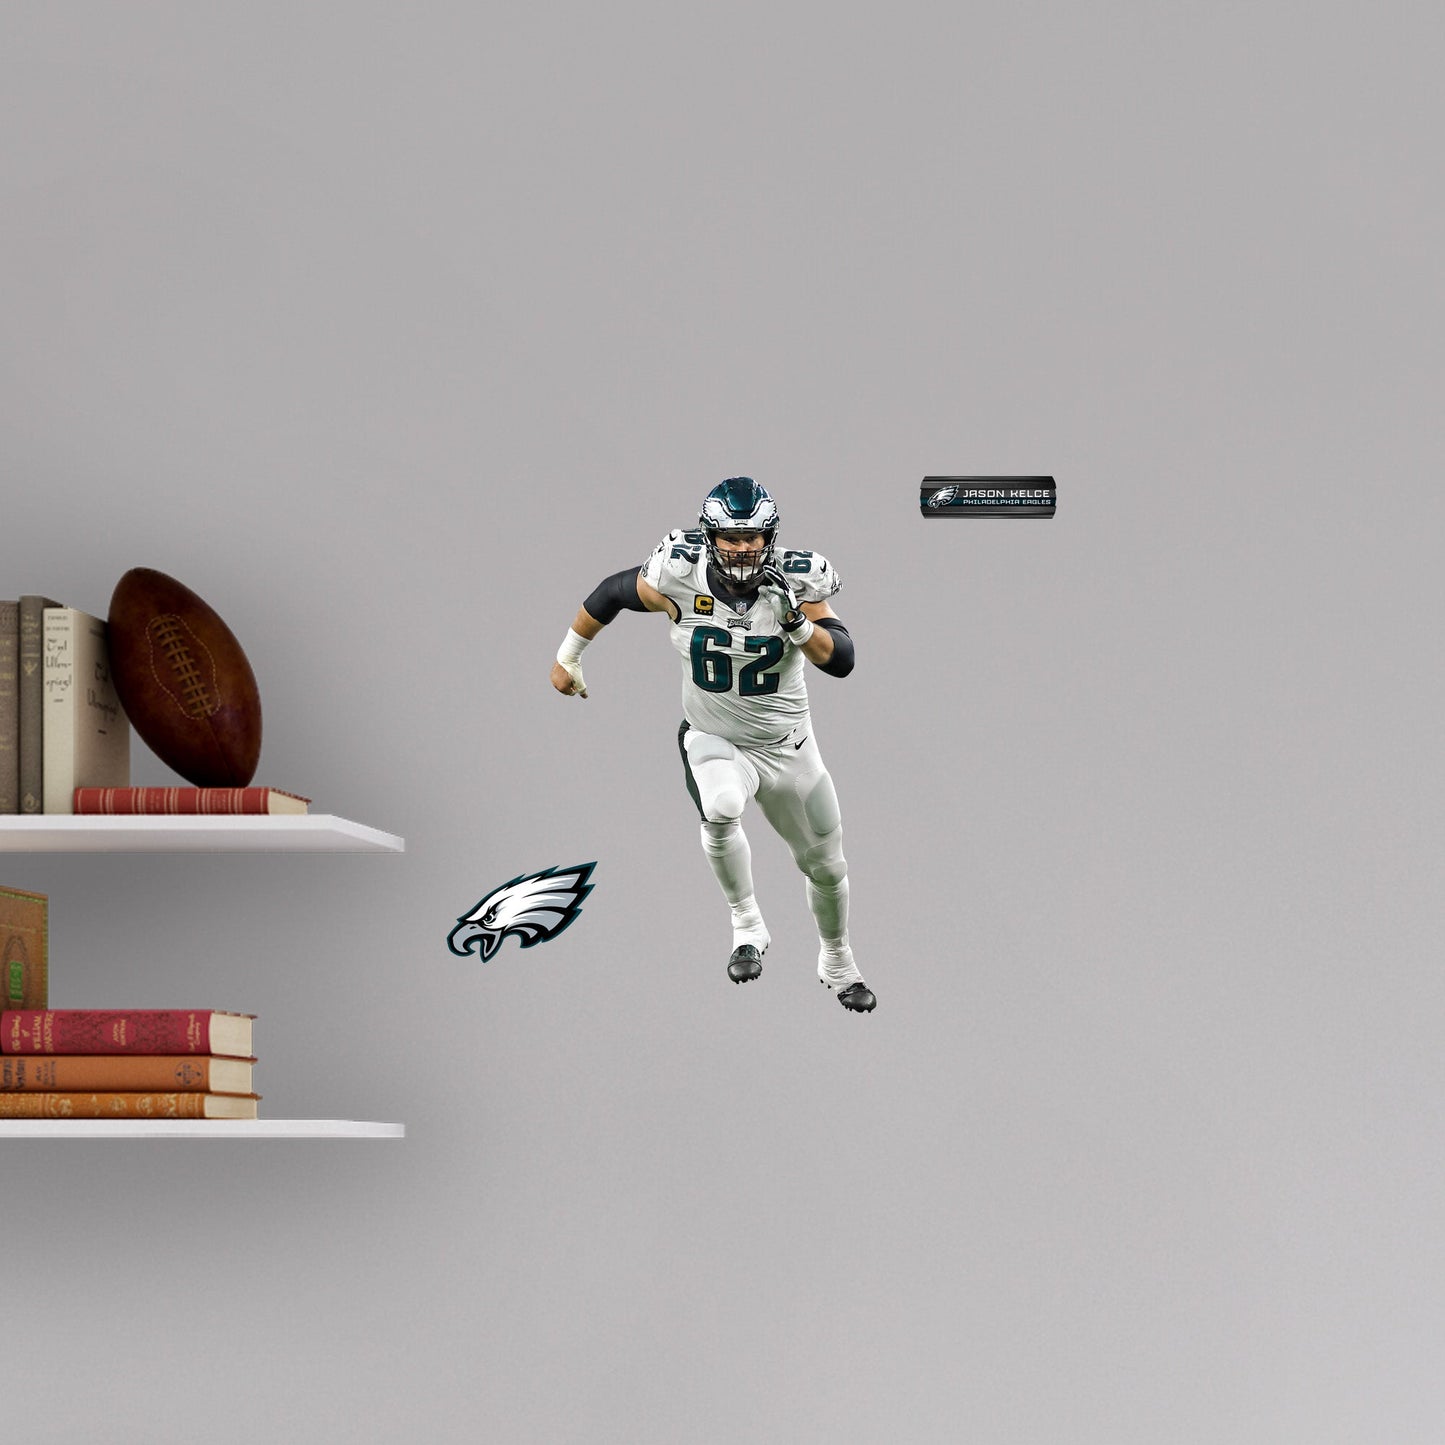 Philadelphia Eagles: Jason Kelce White Jersey - Officially Licensed NFL Removable Adhesive Decal